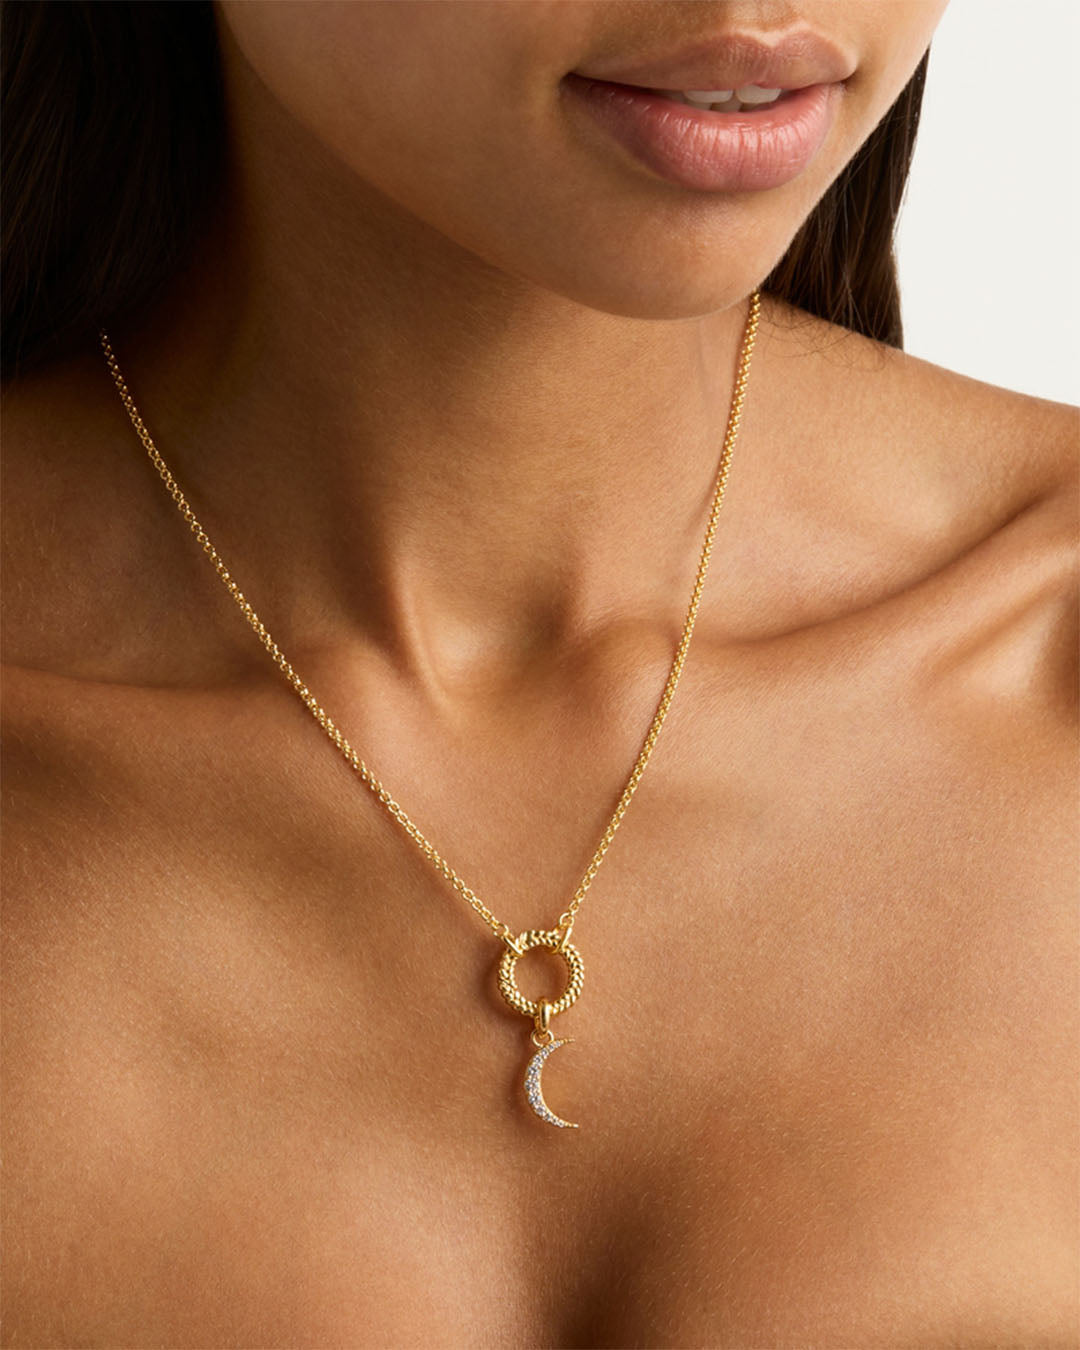 Gold Unlock Your Intuition Annex Necklace Pendant Jewellery by By Charlotte - Prae Store